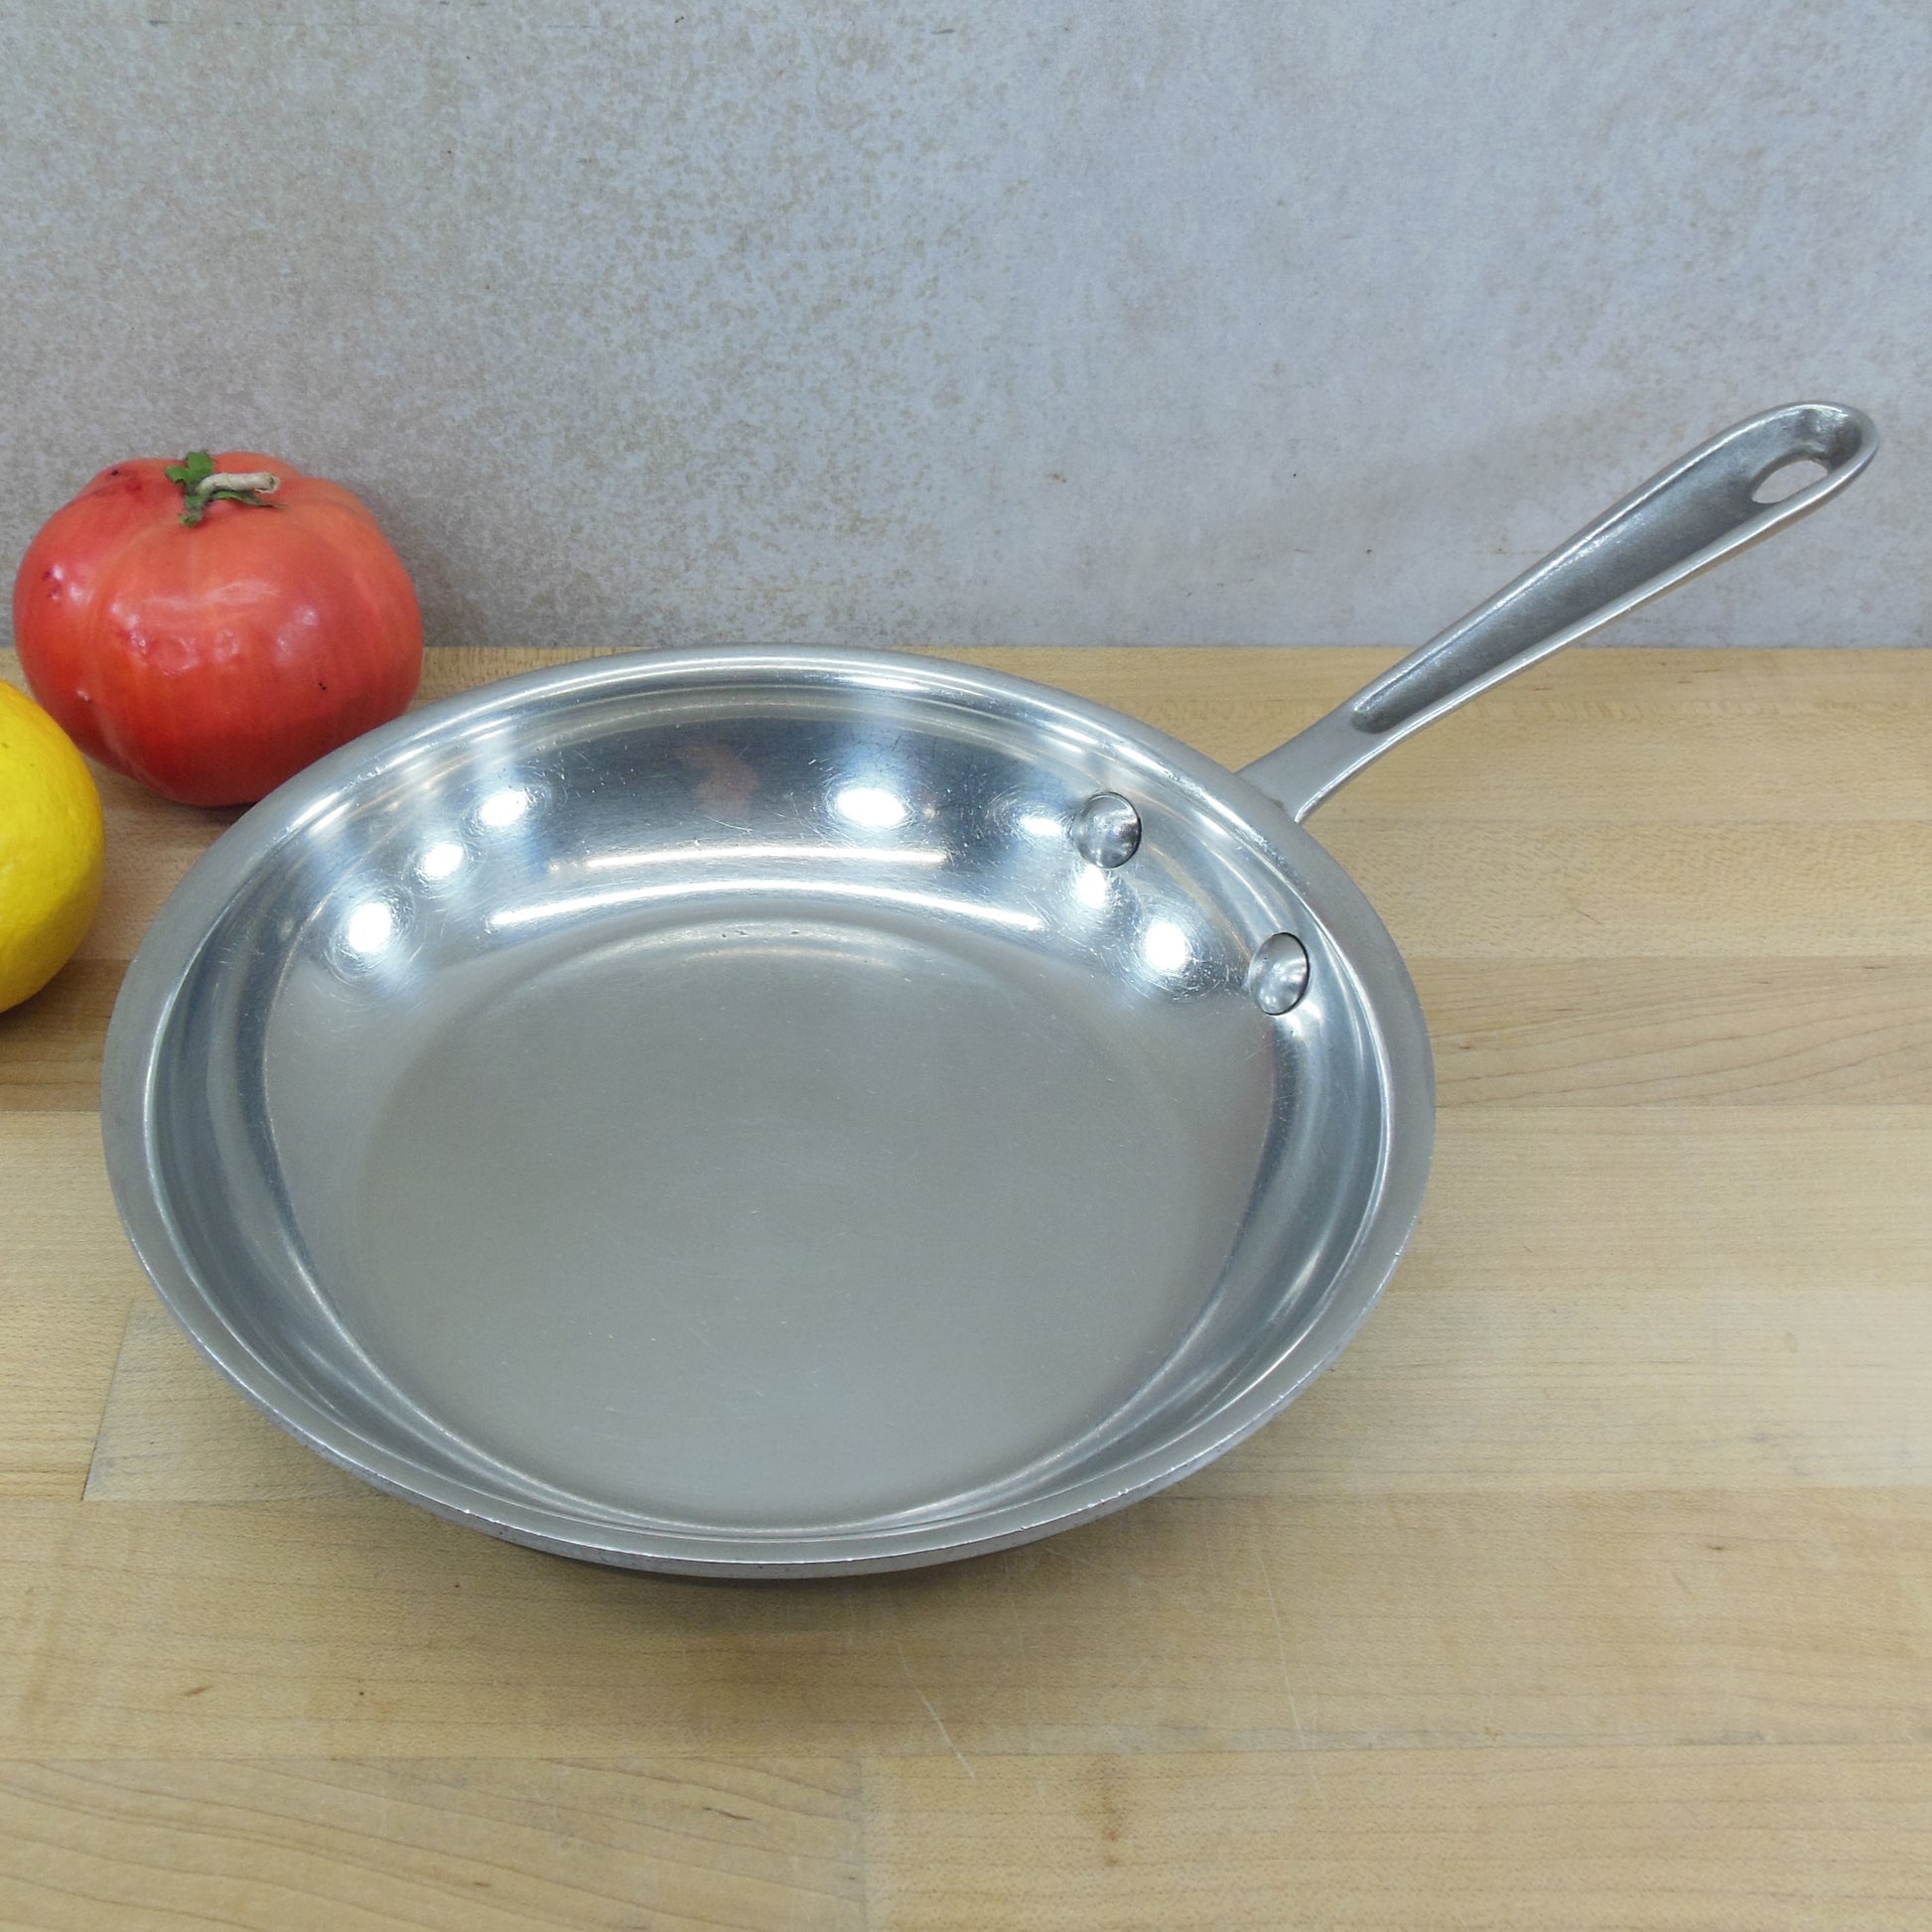 All-Clad Stainless 8 Fry Pan